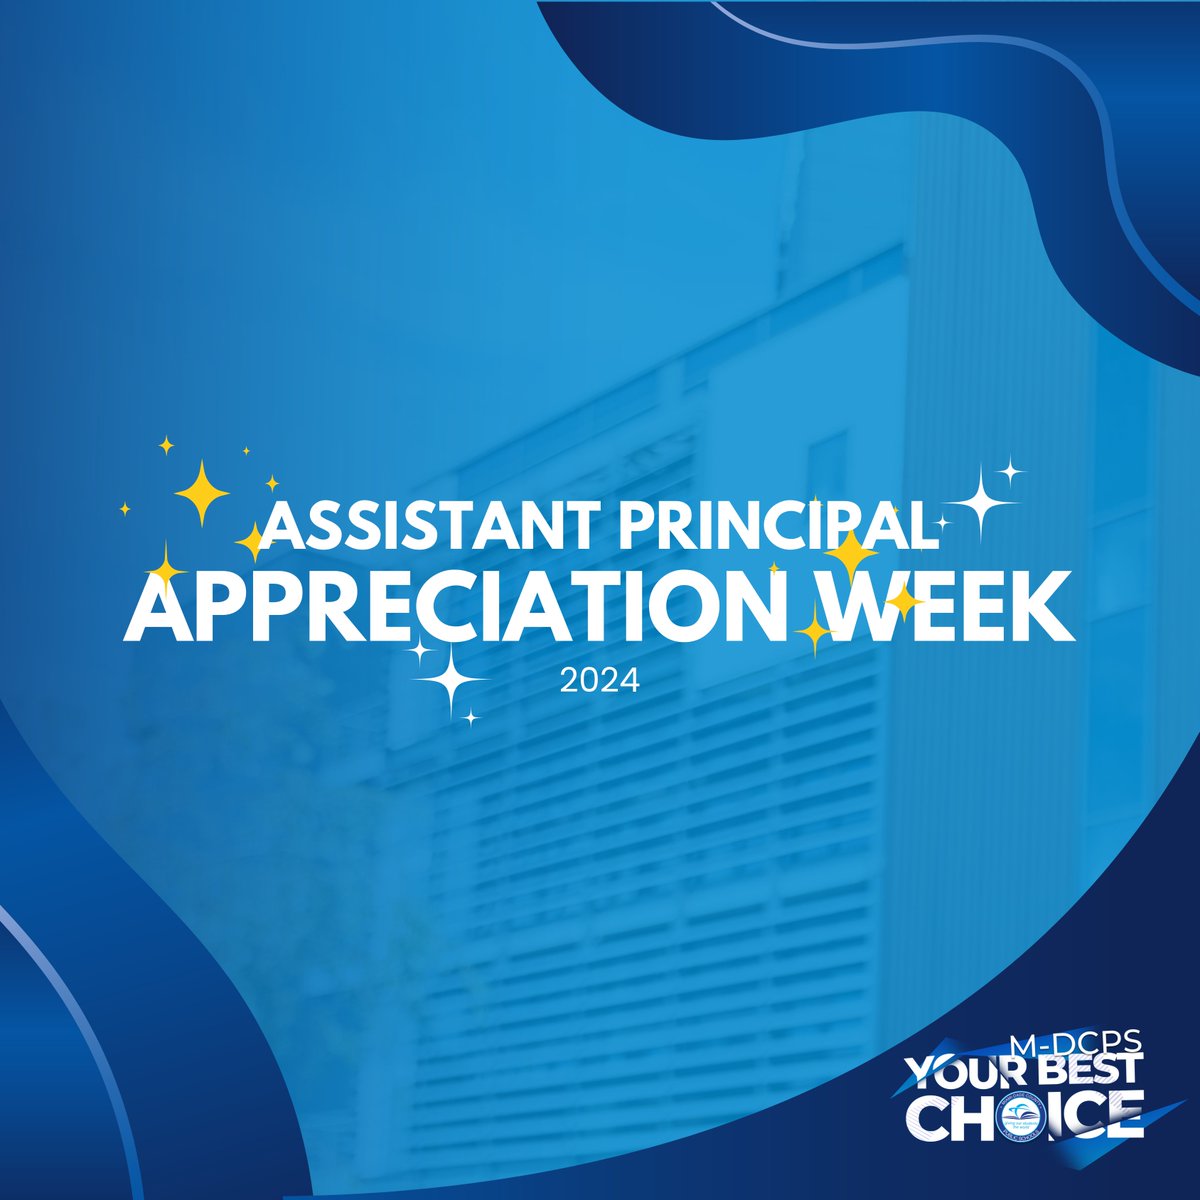 It's Assistant Principal Appreciation Week, and we couldn't be more grateful for your dedication, hard work, and endless support. Keep our schools thriving📚🍎#YourBestChoiceMDCPS 🌟#AssistantPrincipalsAppreciation #SchoolLeadership